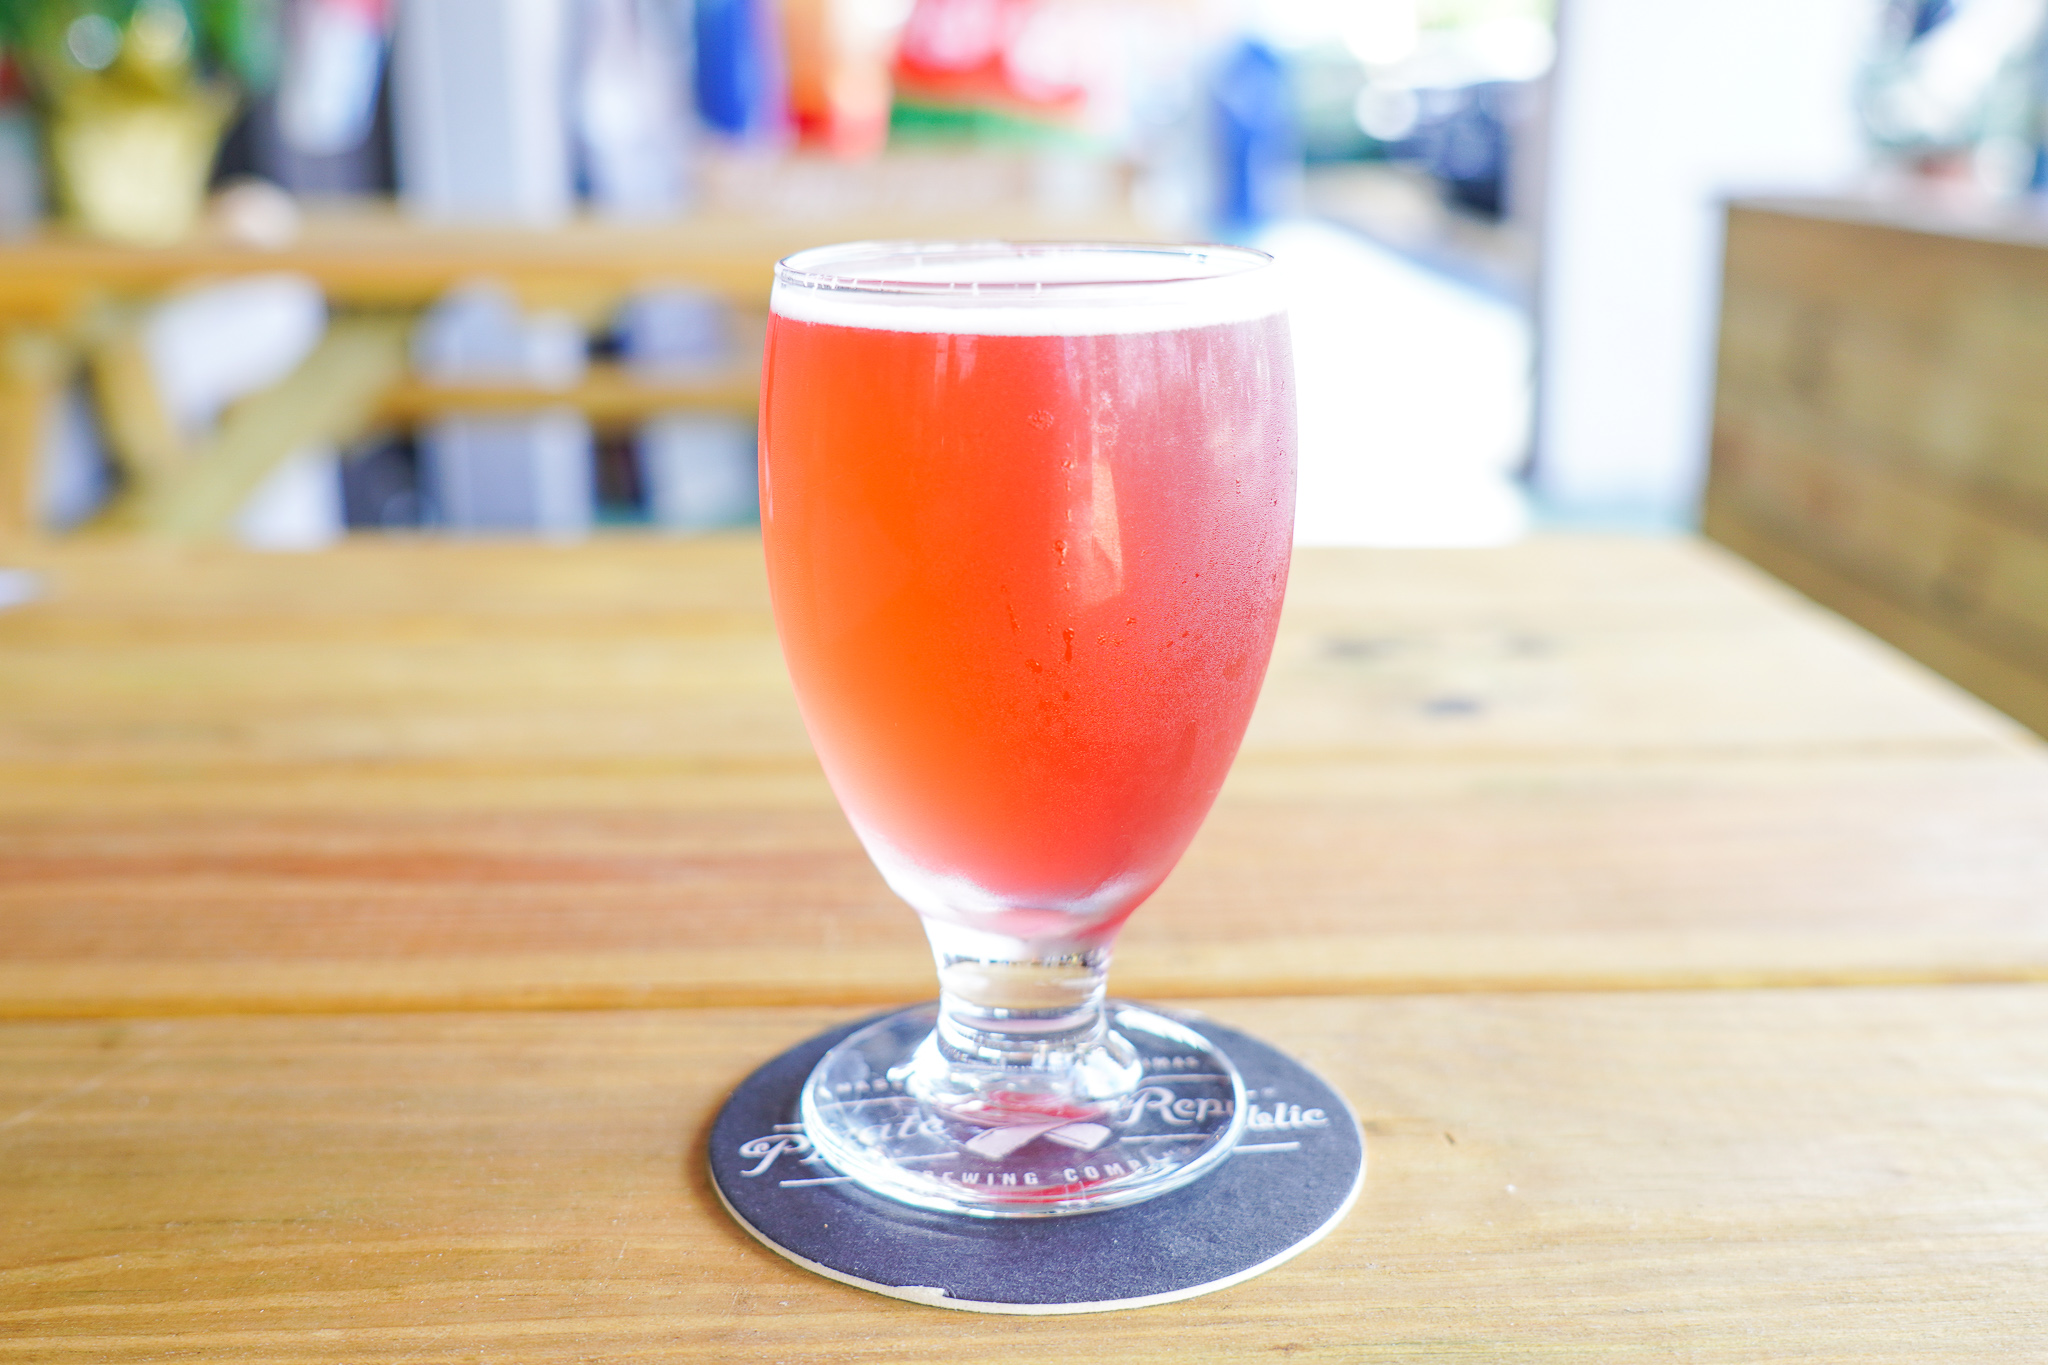 Category 36 Wicked Weed Dragonfruit Sour